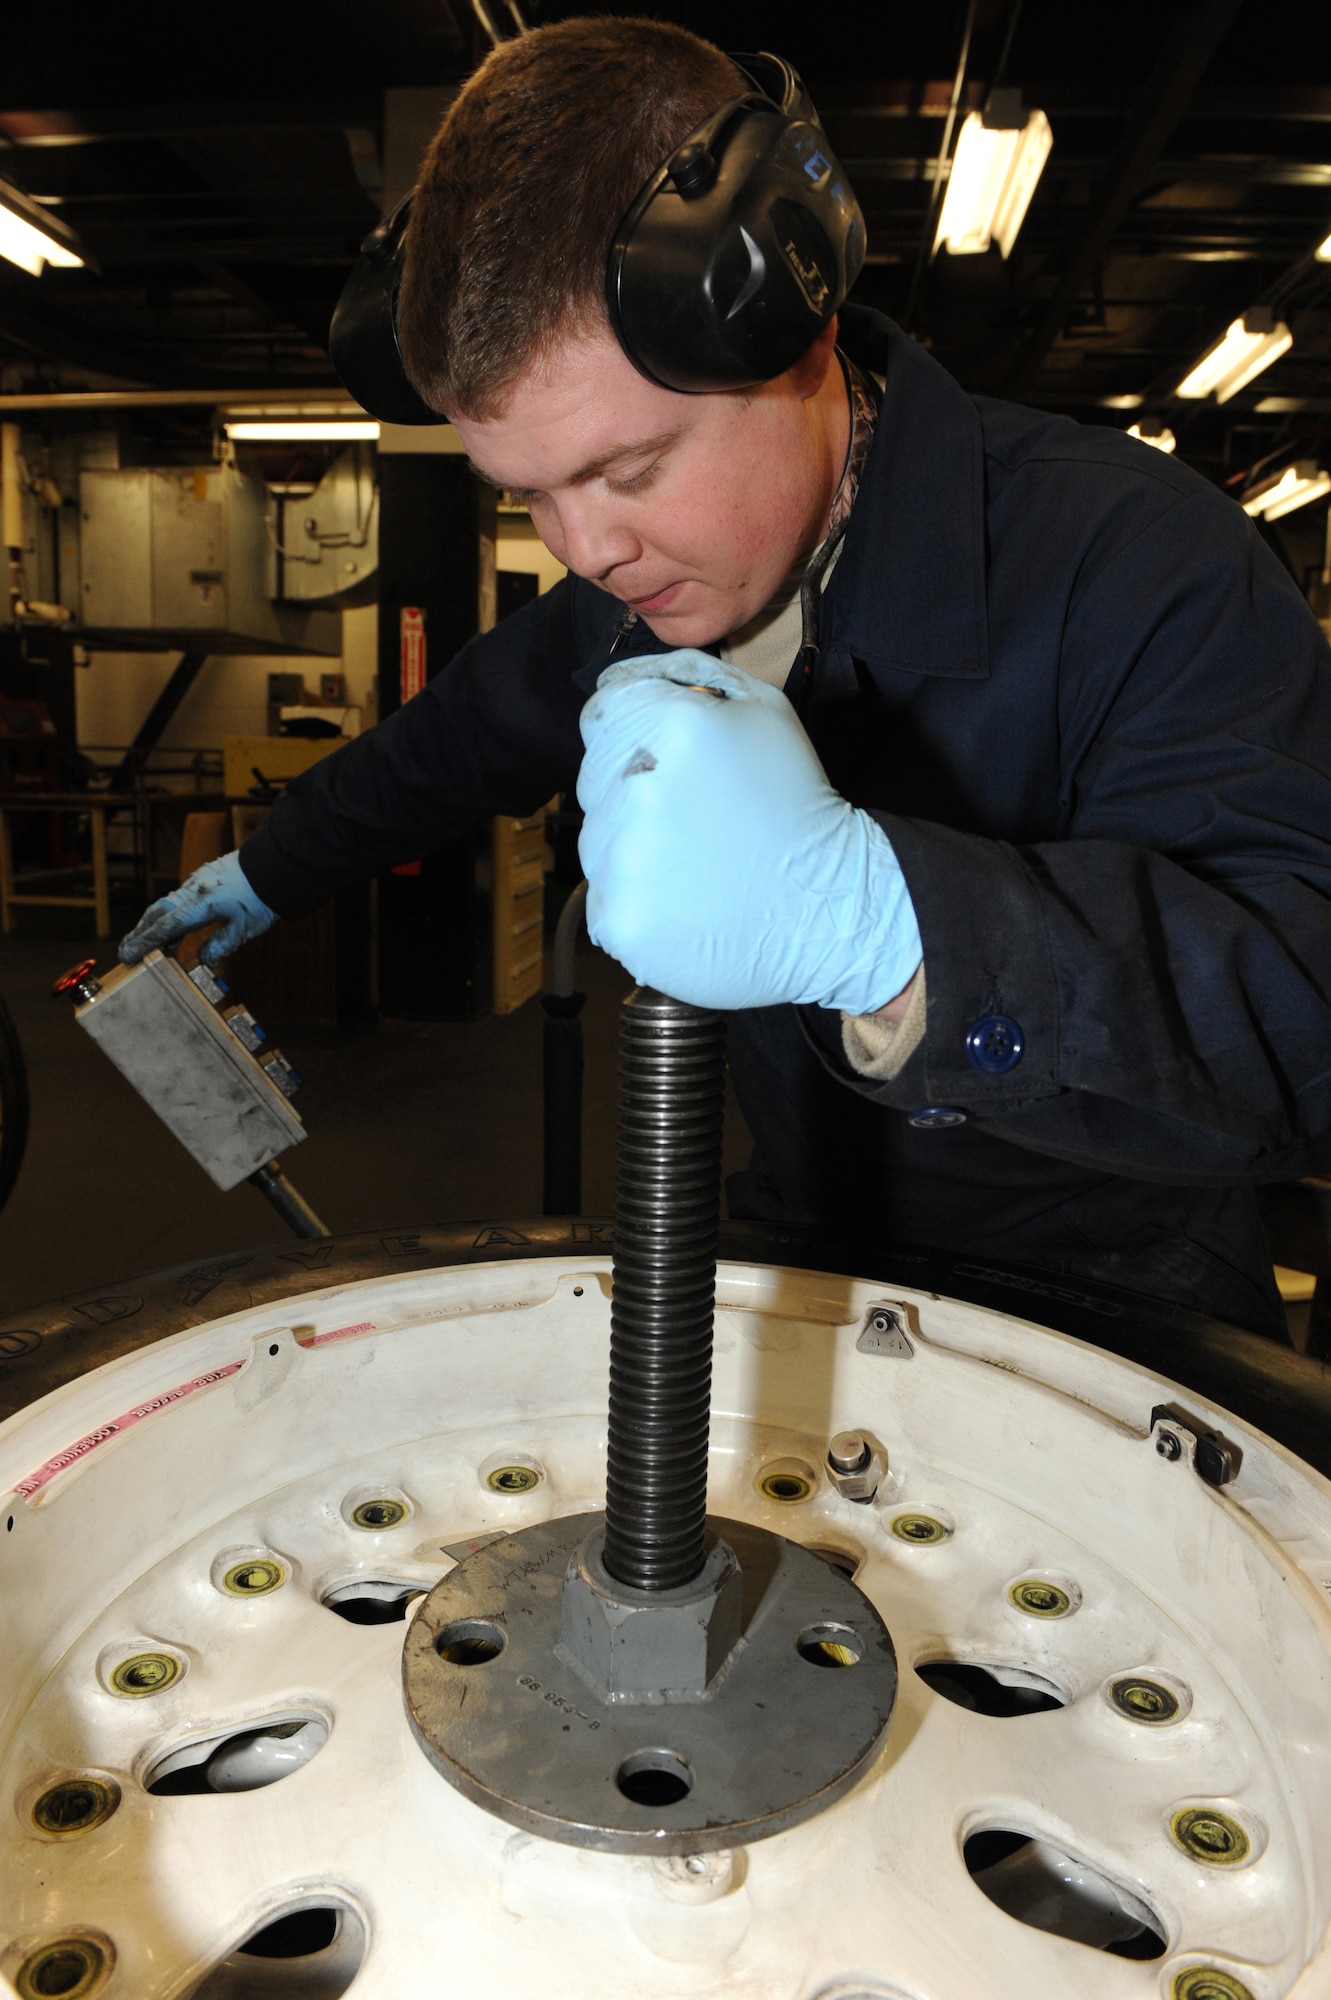 WHITEMAN AIR FORCE BASE, Mo. - Senior Airman Eric Pearl, 509th Aircraft Maintenance Squadron wheel and tire shop technician, presses two wheel halves together with the “wheel machine,” Feb. 16, 2010. Each B-2 wheel weighs in excess of 275 lbs., and requires the use of specialized, automated equipment for assembly.  (U.S. Air Force photo/Airman 1st Class Carlin Leslie)